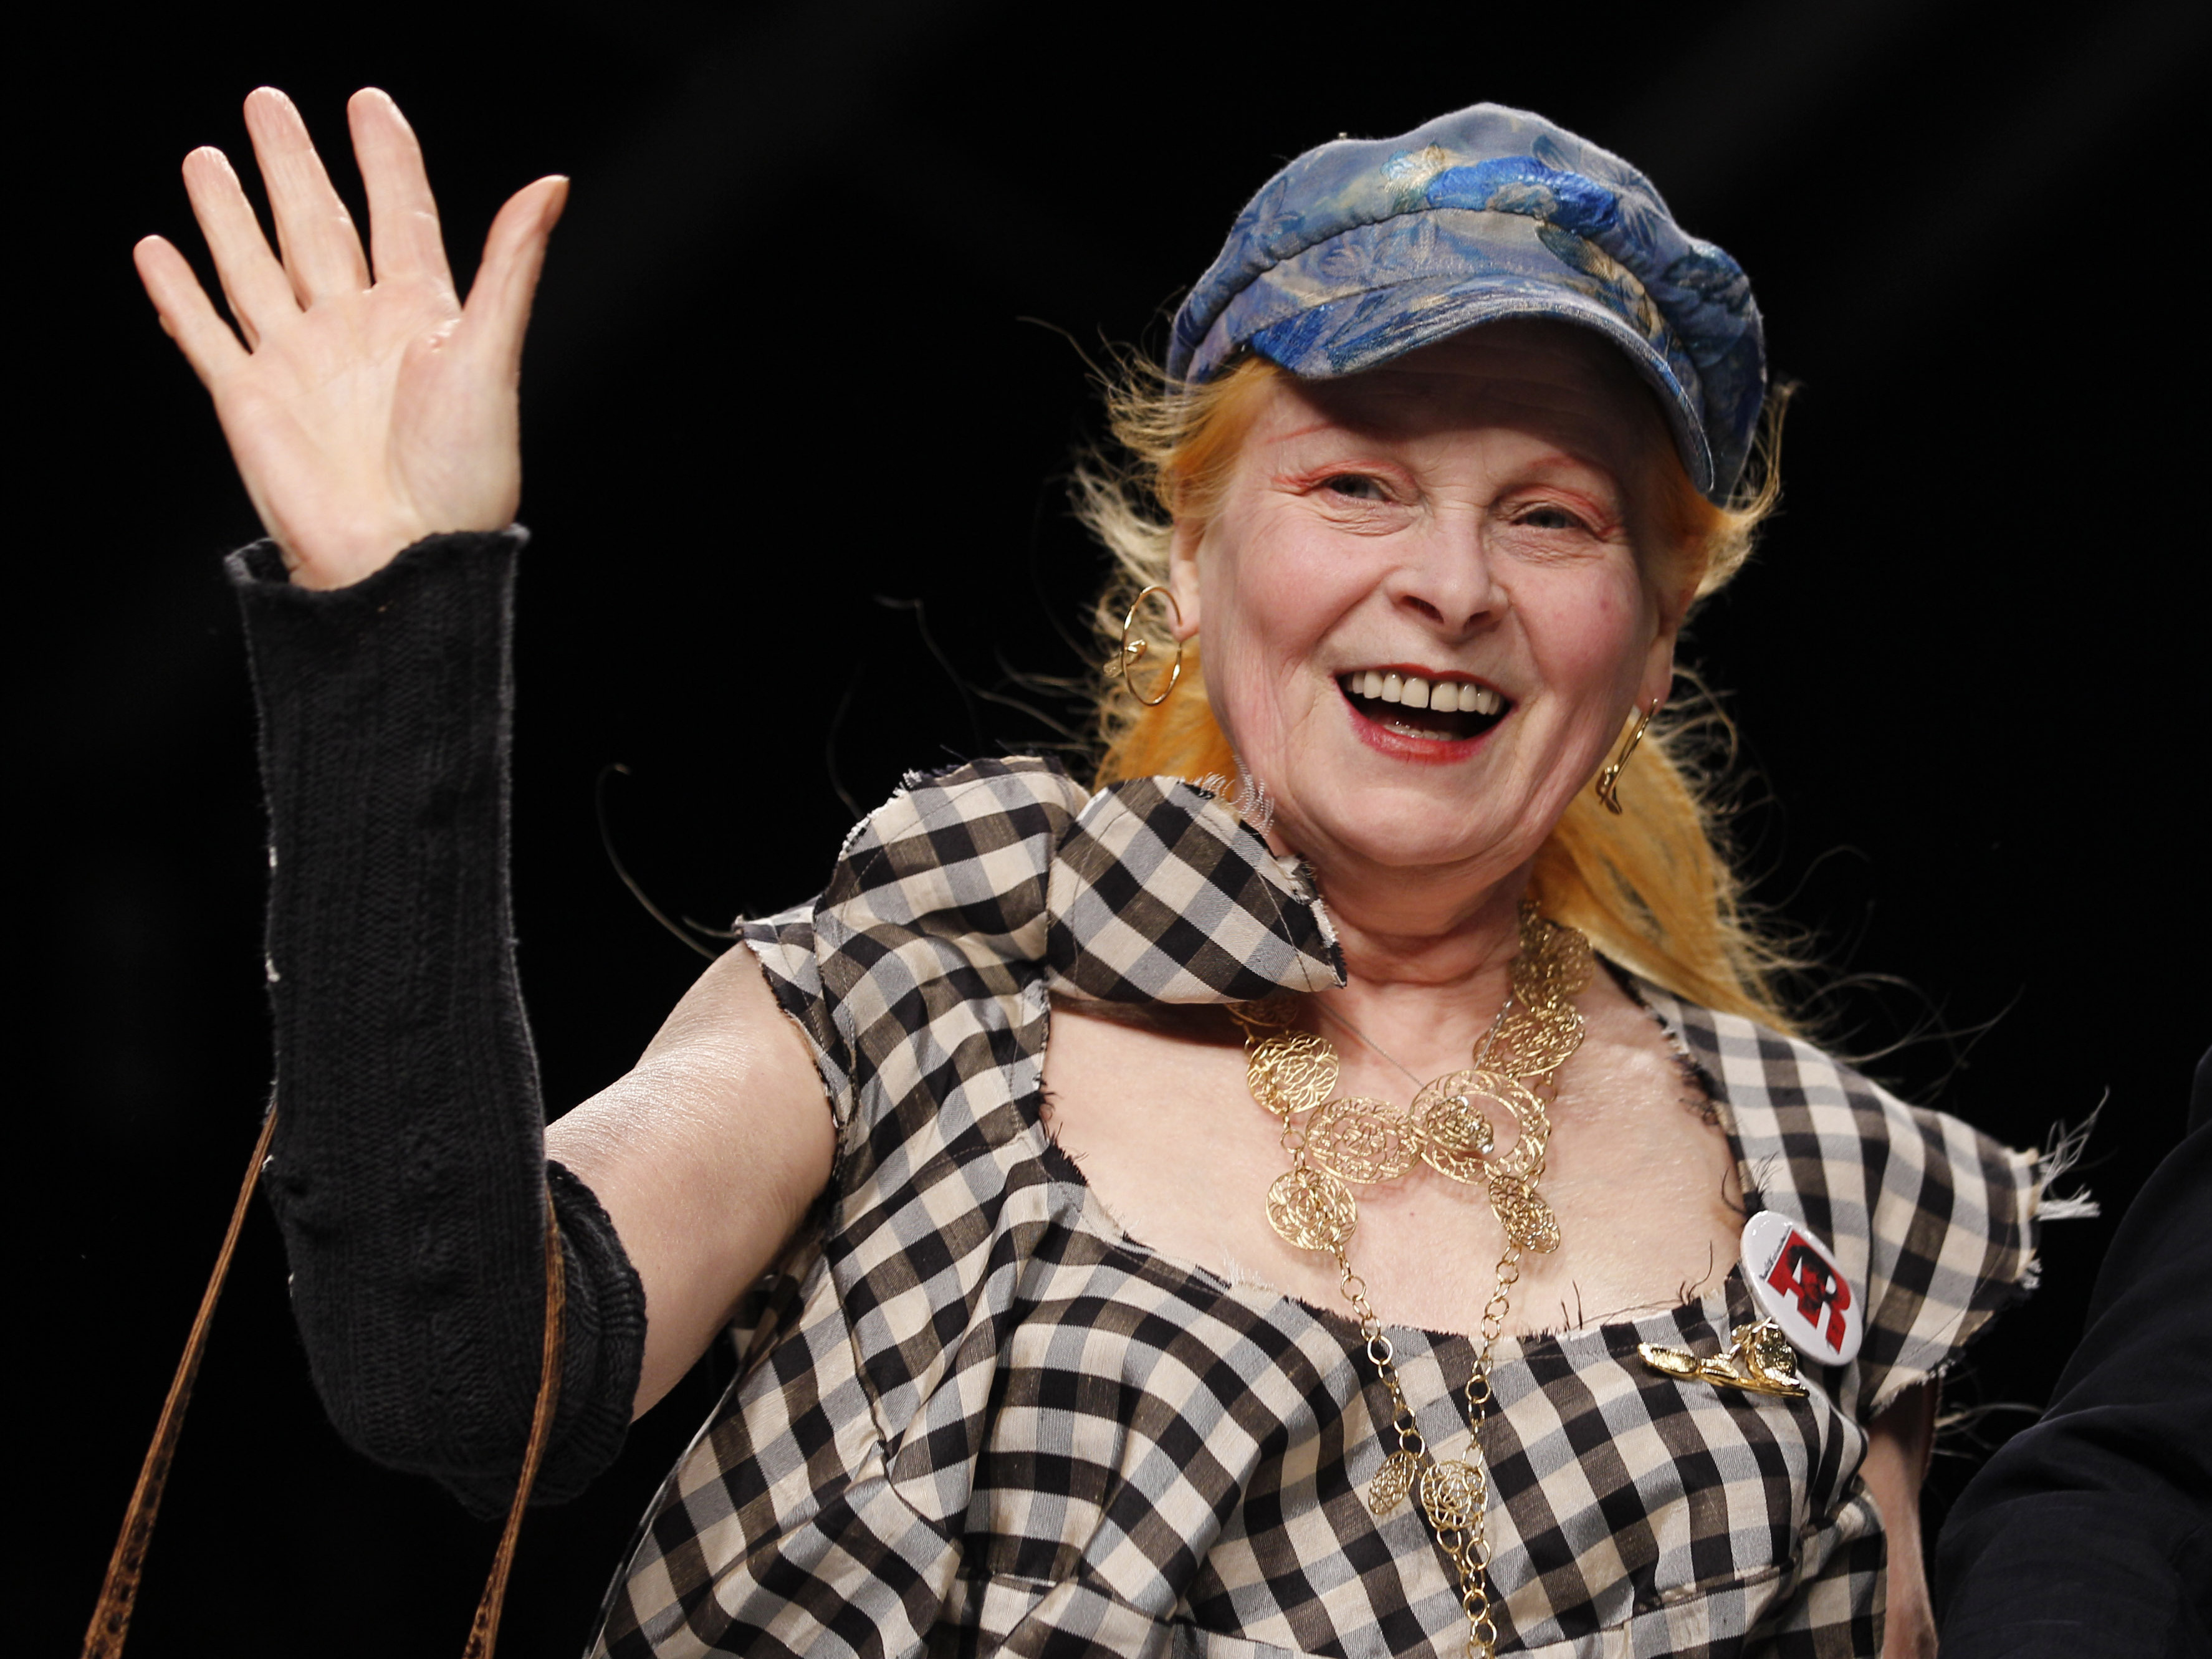 Vivienne Westwood wearing a black and white checkered top